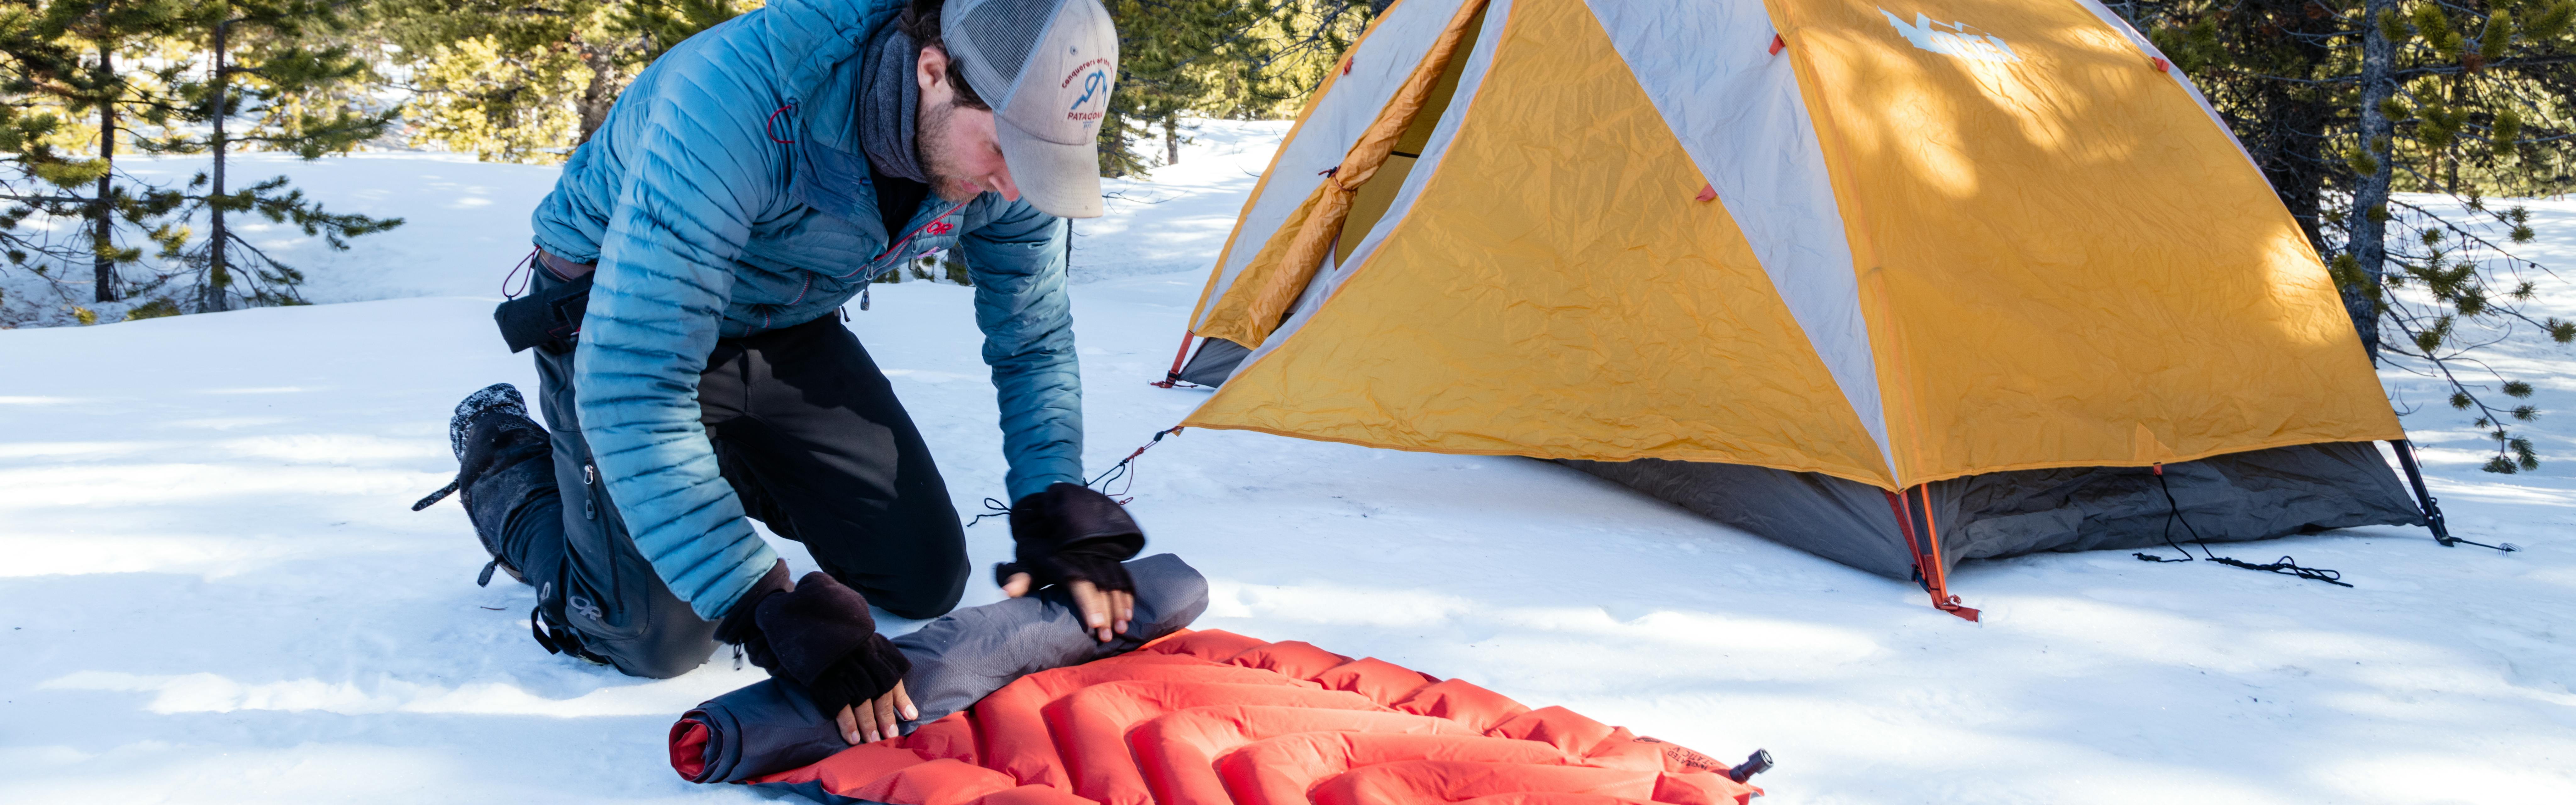 The Most Comfortable Sleeping Pad Options for Camping and Backpacking